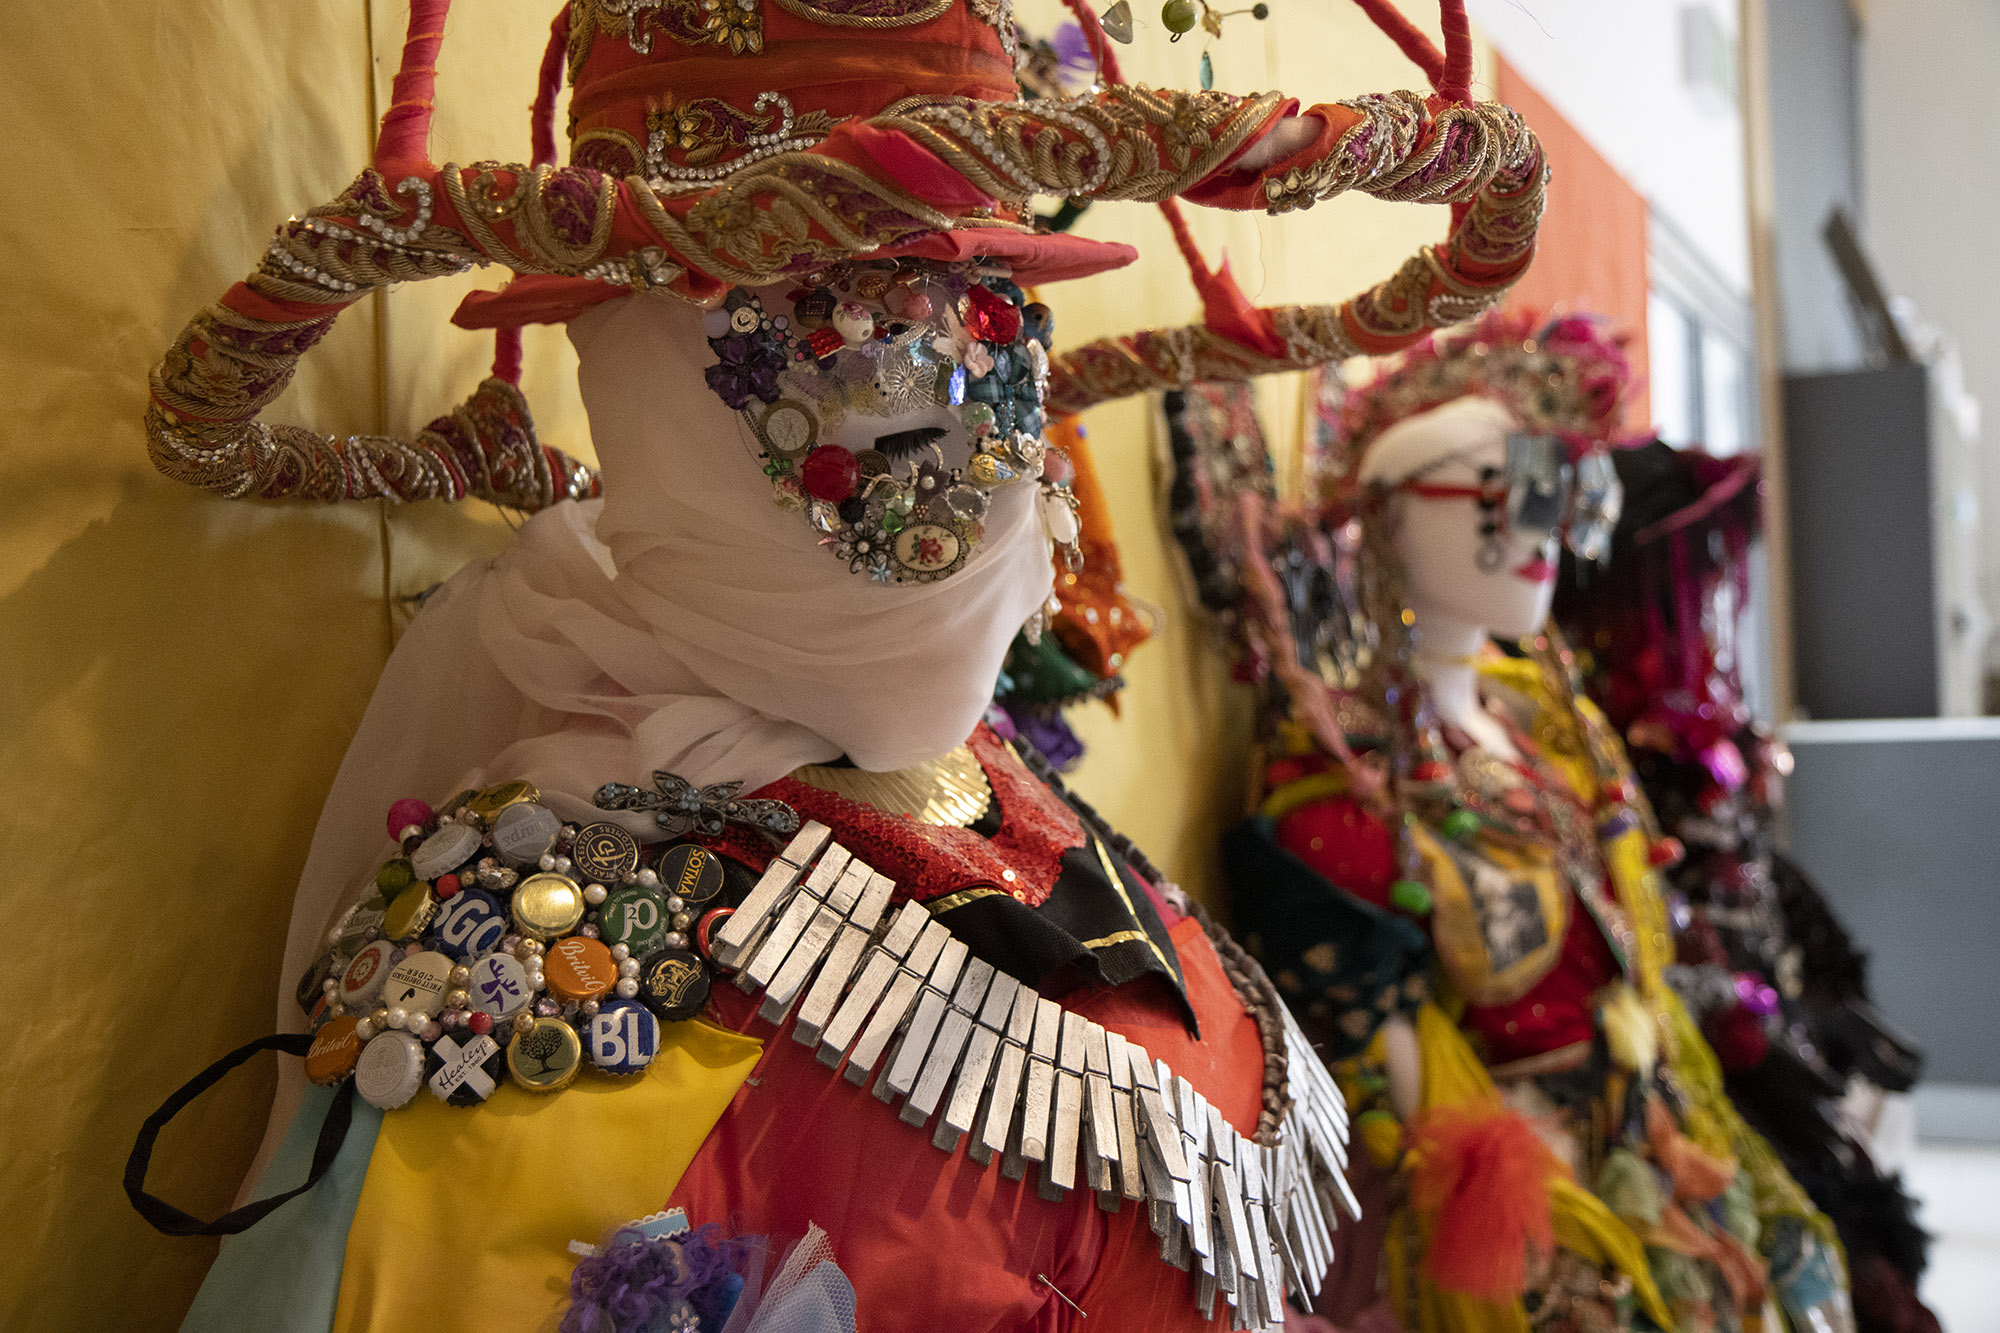 A set of Daniel Lismore-inspired sculptures made by community groups on display. The sculptures are comprised of mannequins dressed elaborately in a range of recycled and repurposed materials, such as fabrics, charity shop clothes and accessories, bottle tops, buttons, beads and jewellery